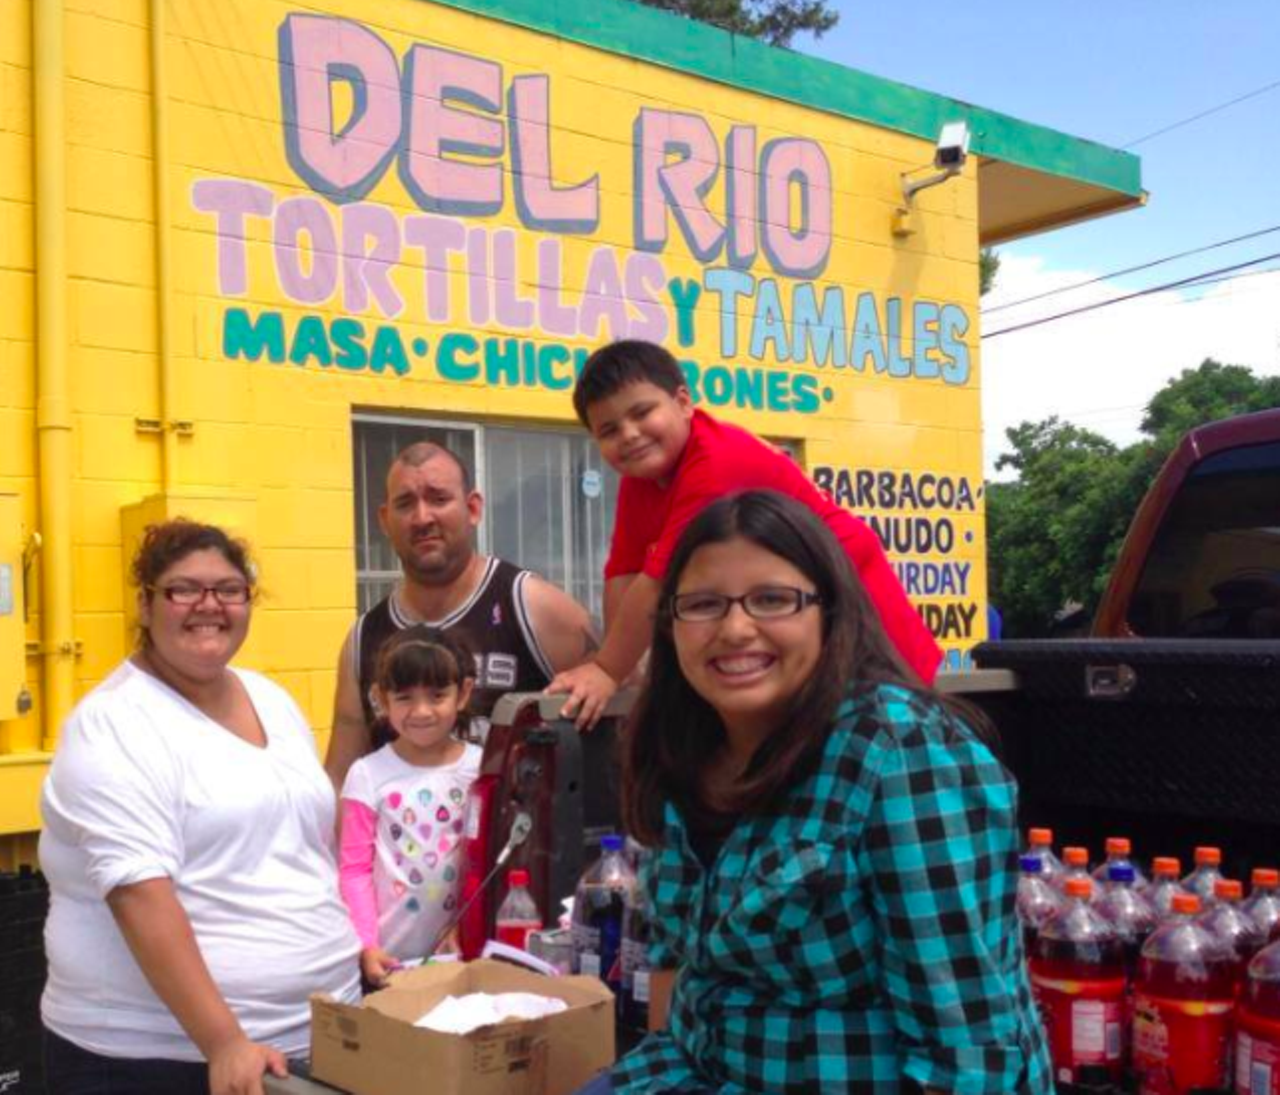 Del Rio Tamale & Tortilla Factory
1402 Gillette Blvd., (210) 922-4810, delriotortillas.com
Whether you want fresh tamales or tortillas to try to pass as your own, Del Rio is the place to trust. You can also get your hands on some delicious menudo and barbacoa. Del Rio seems like the perfect place to start your Sunday morning.
Photo via Facebook / Del Rio Tortilla Factory